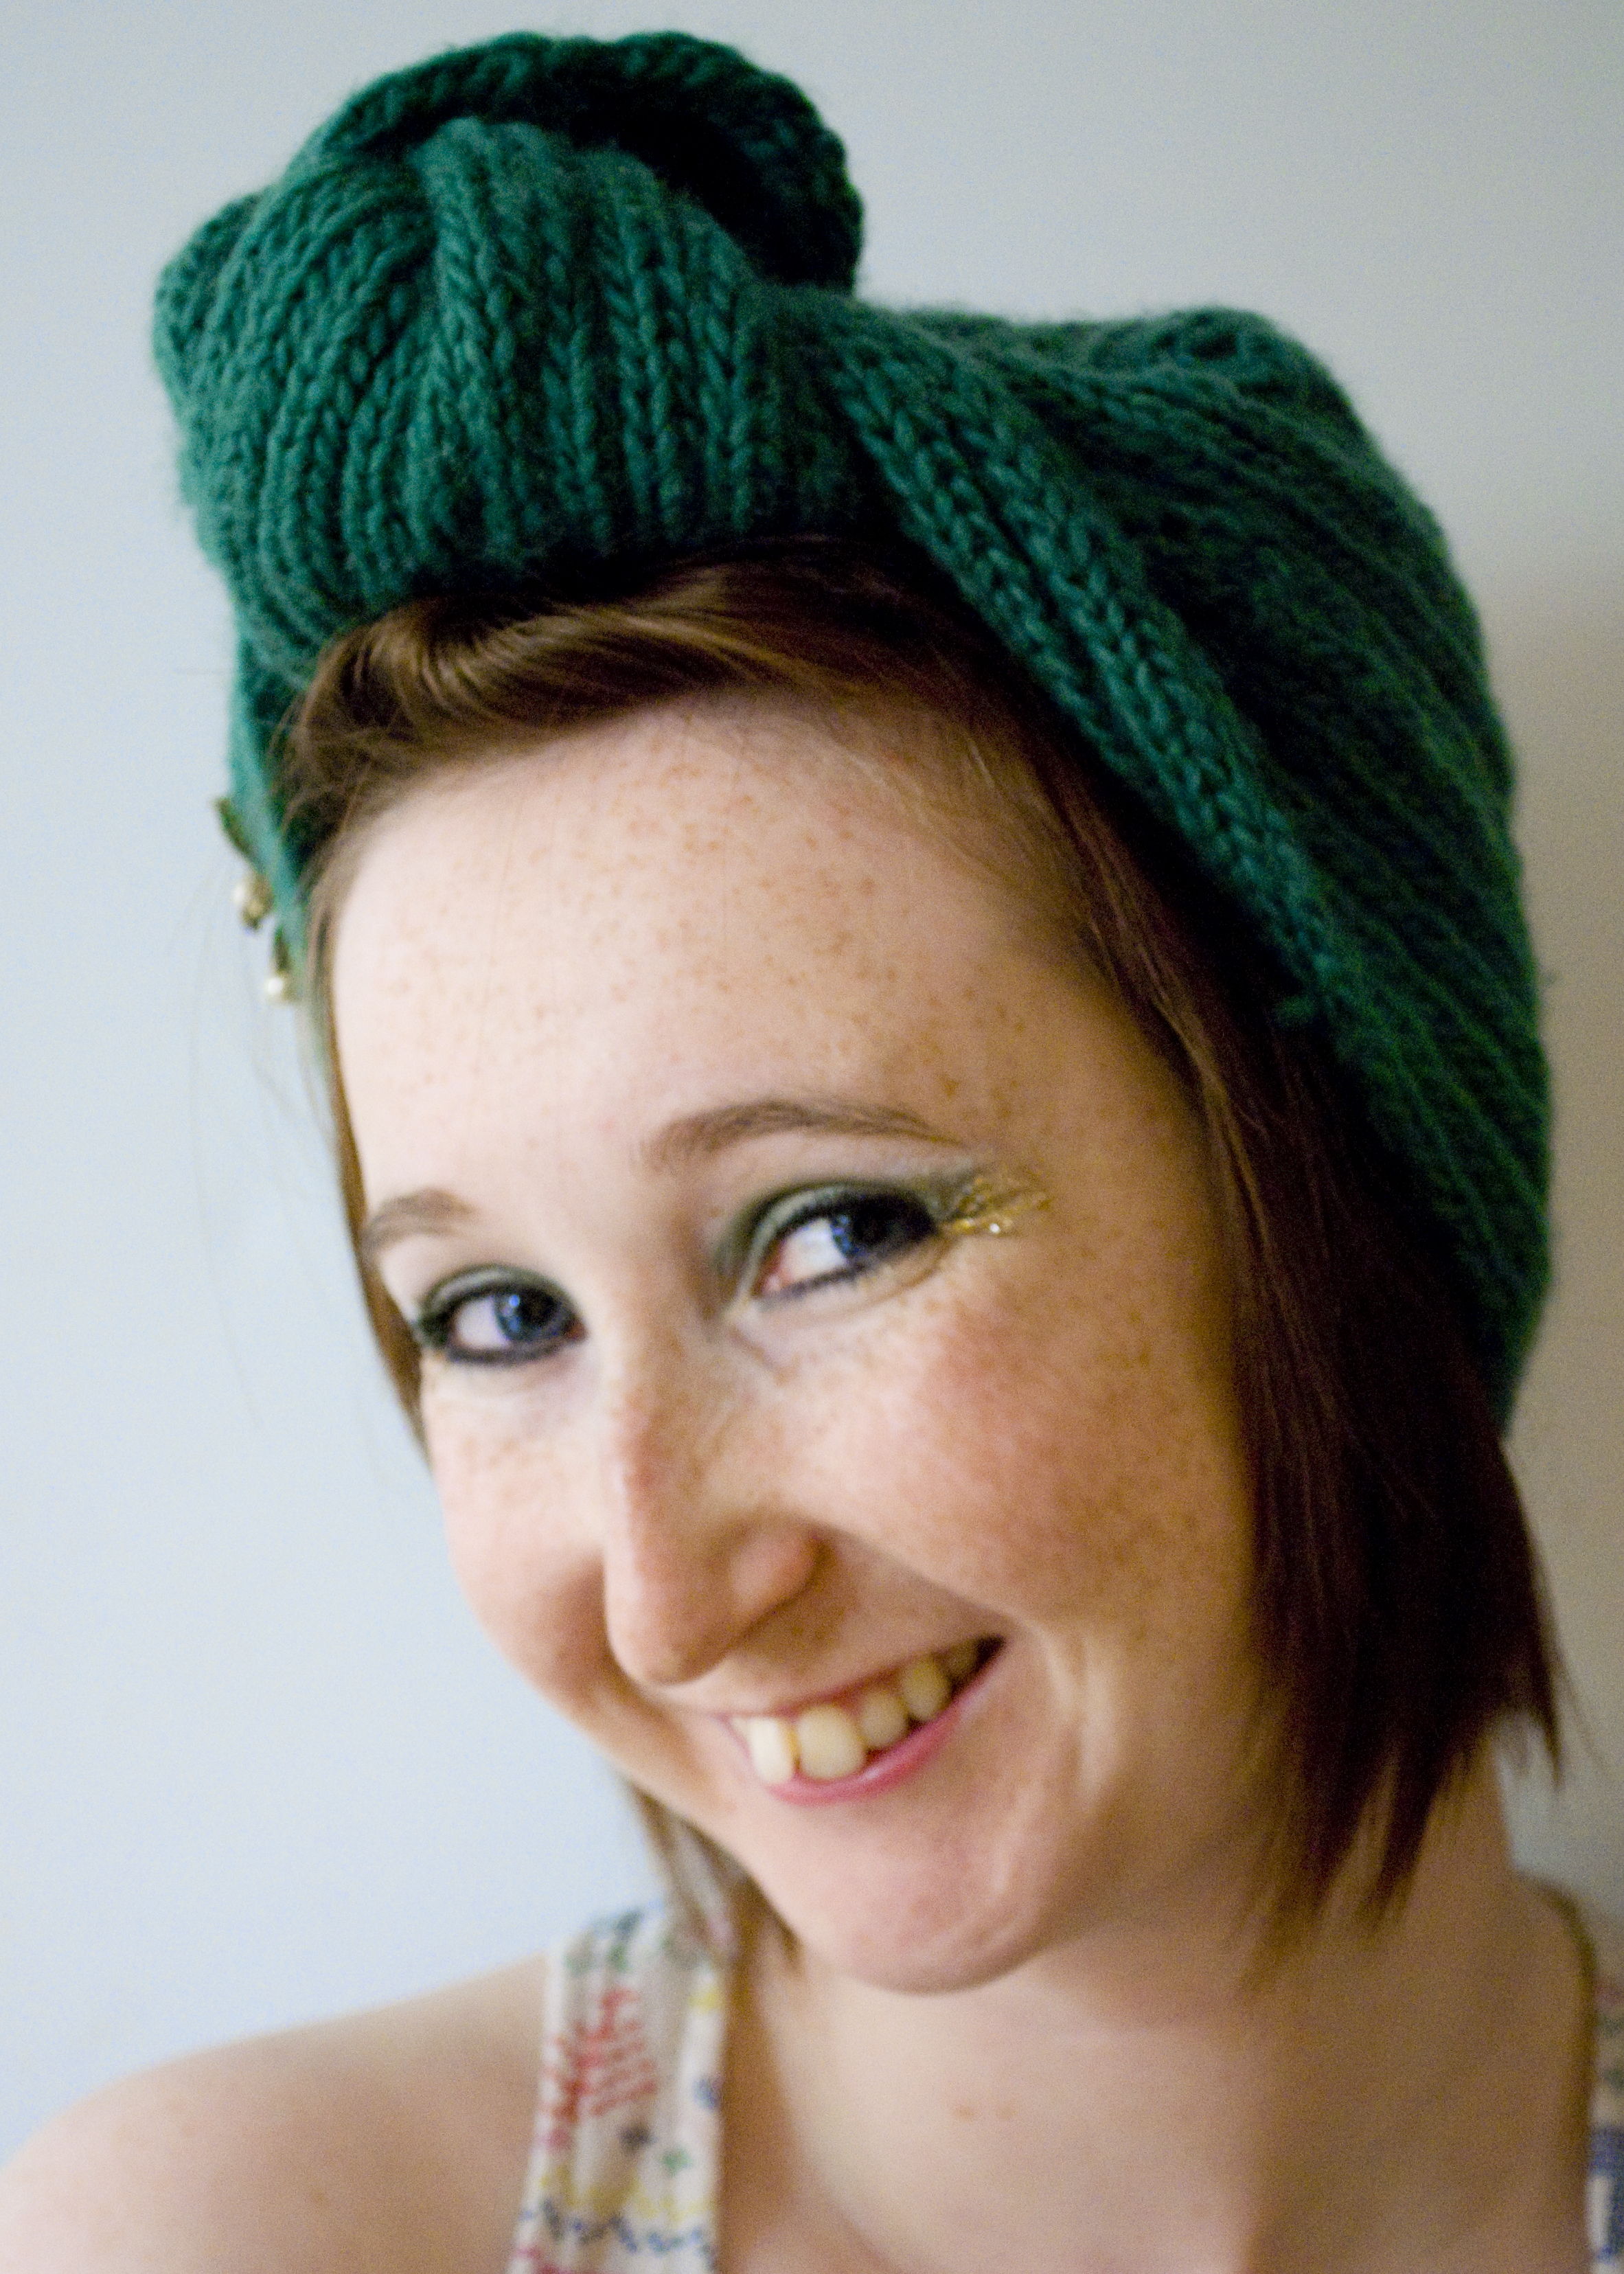 Knitting Patterns Vogue Swapping Toques For Turbans Vogue Knitting Pattern Review Ply